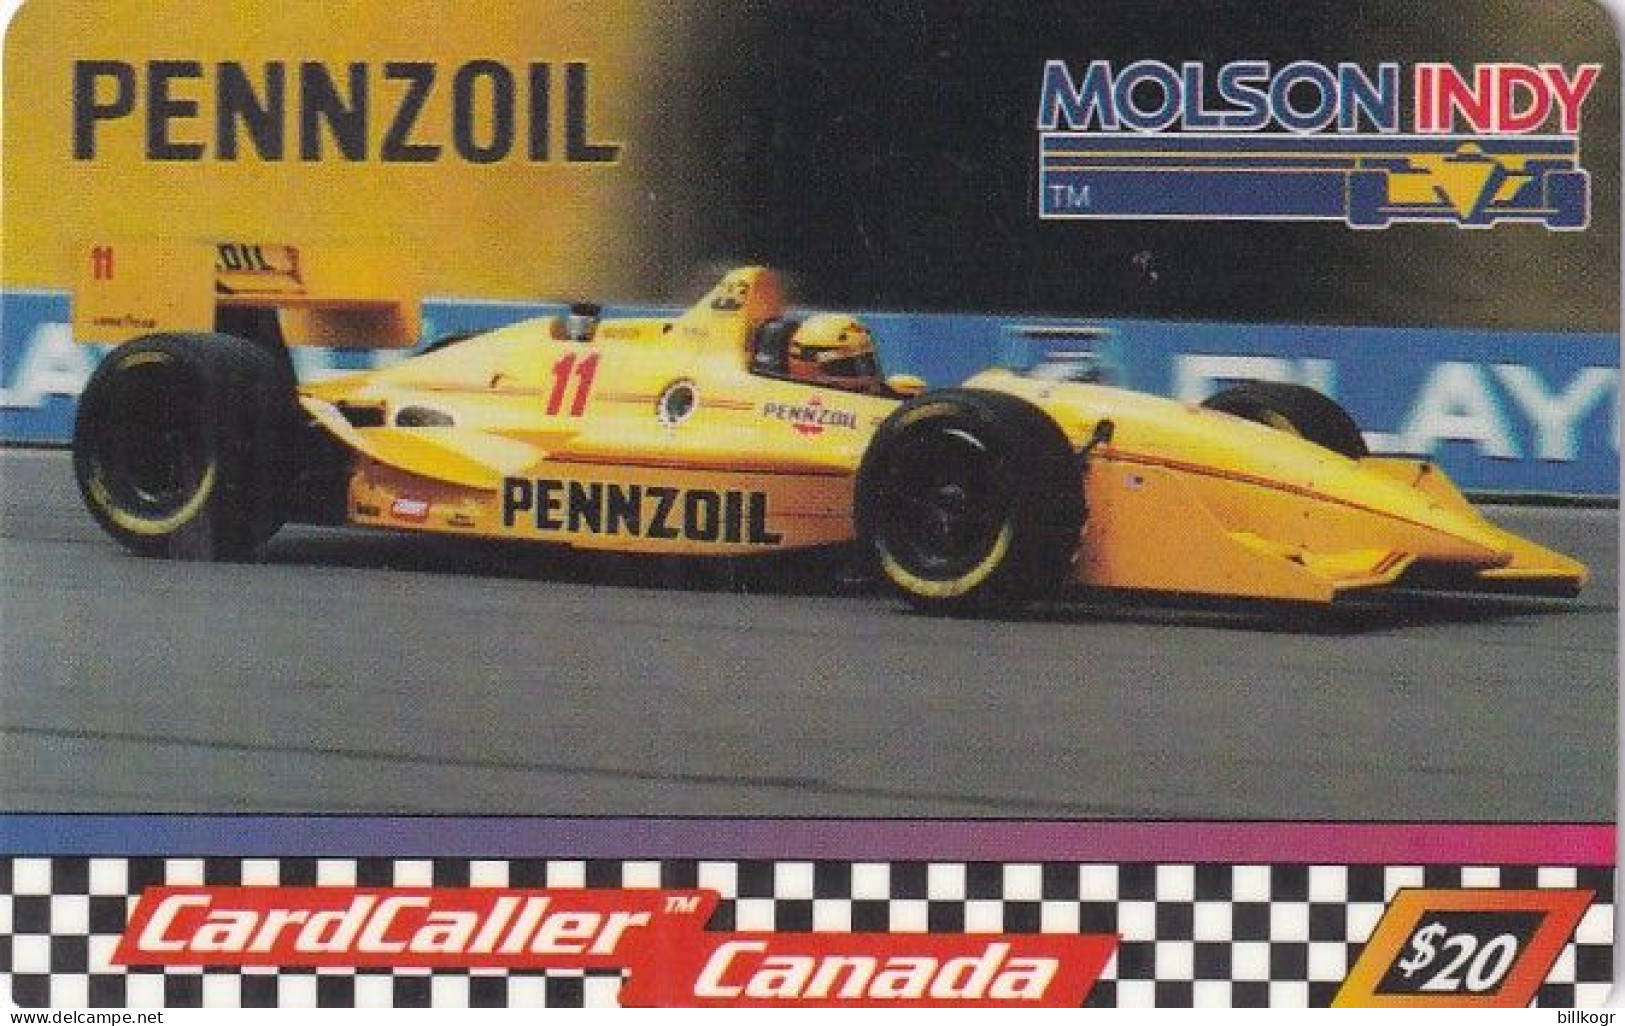 CANADA - Molson Indy/Penzoil, Cardcaller Prepaid Card $20, Exp.date 02/01/96, Used - Canada